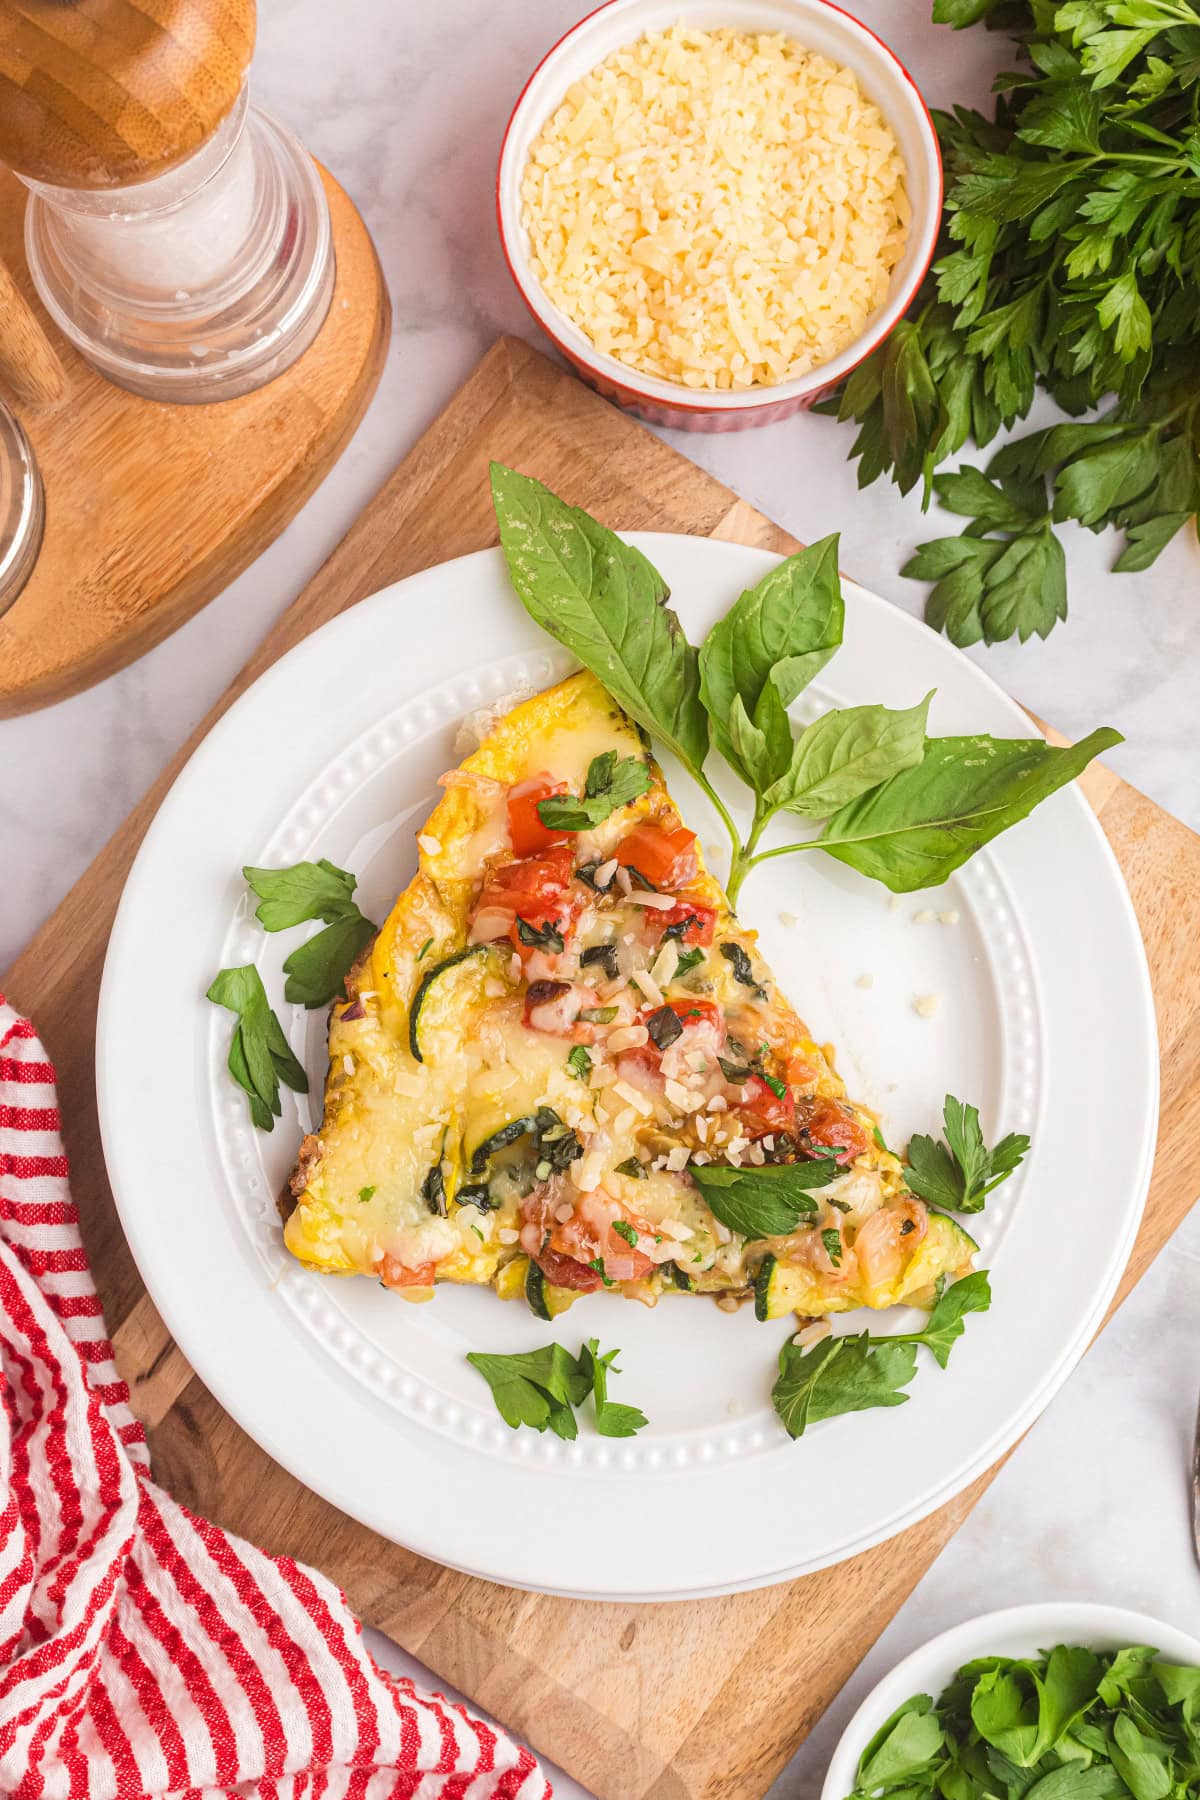 slice of squash and tomato oven frittata on plate